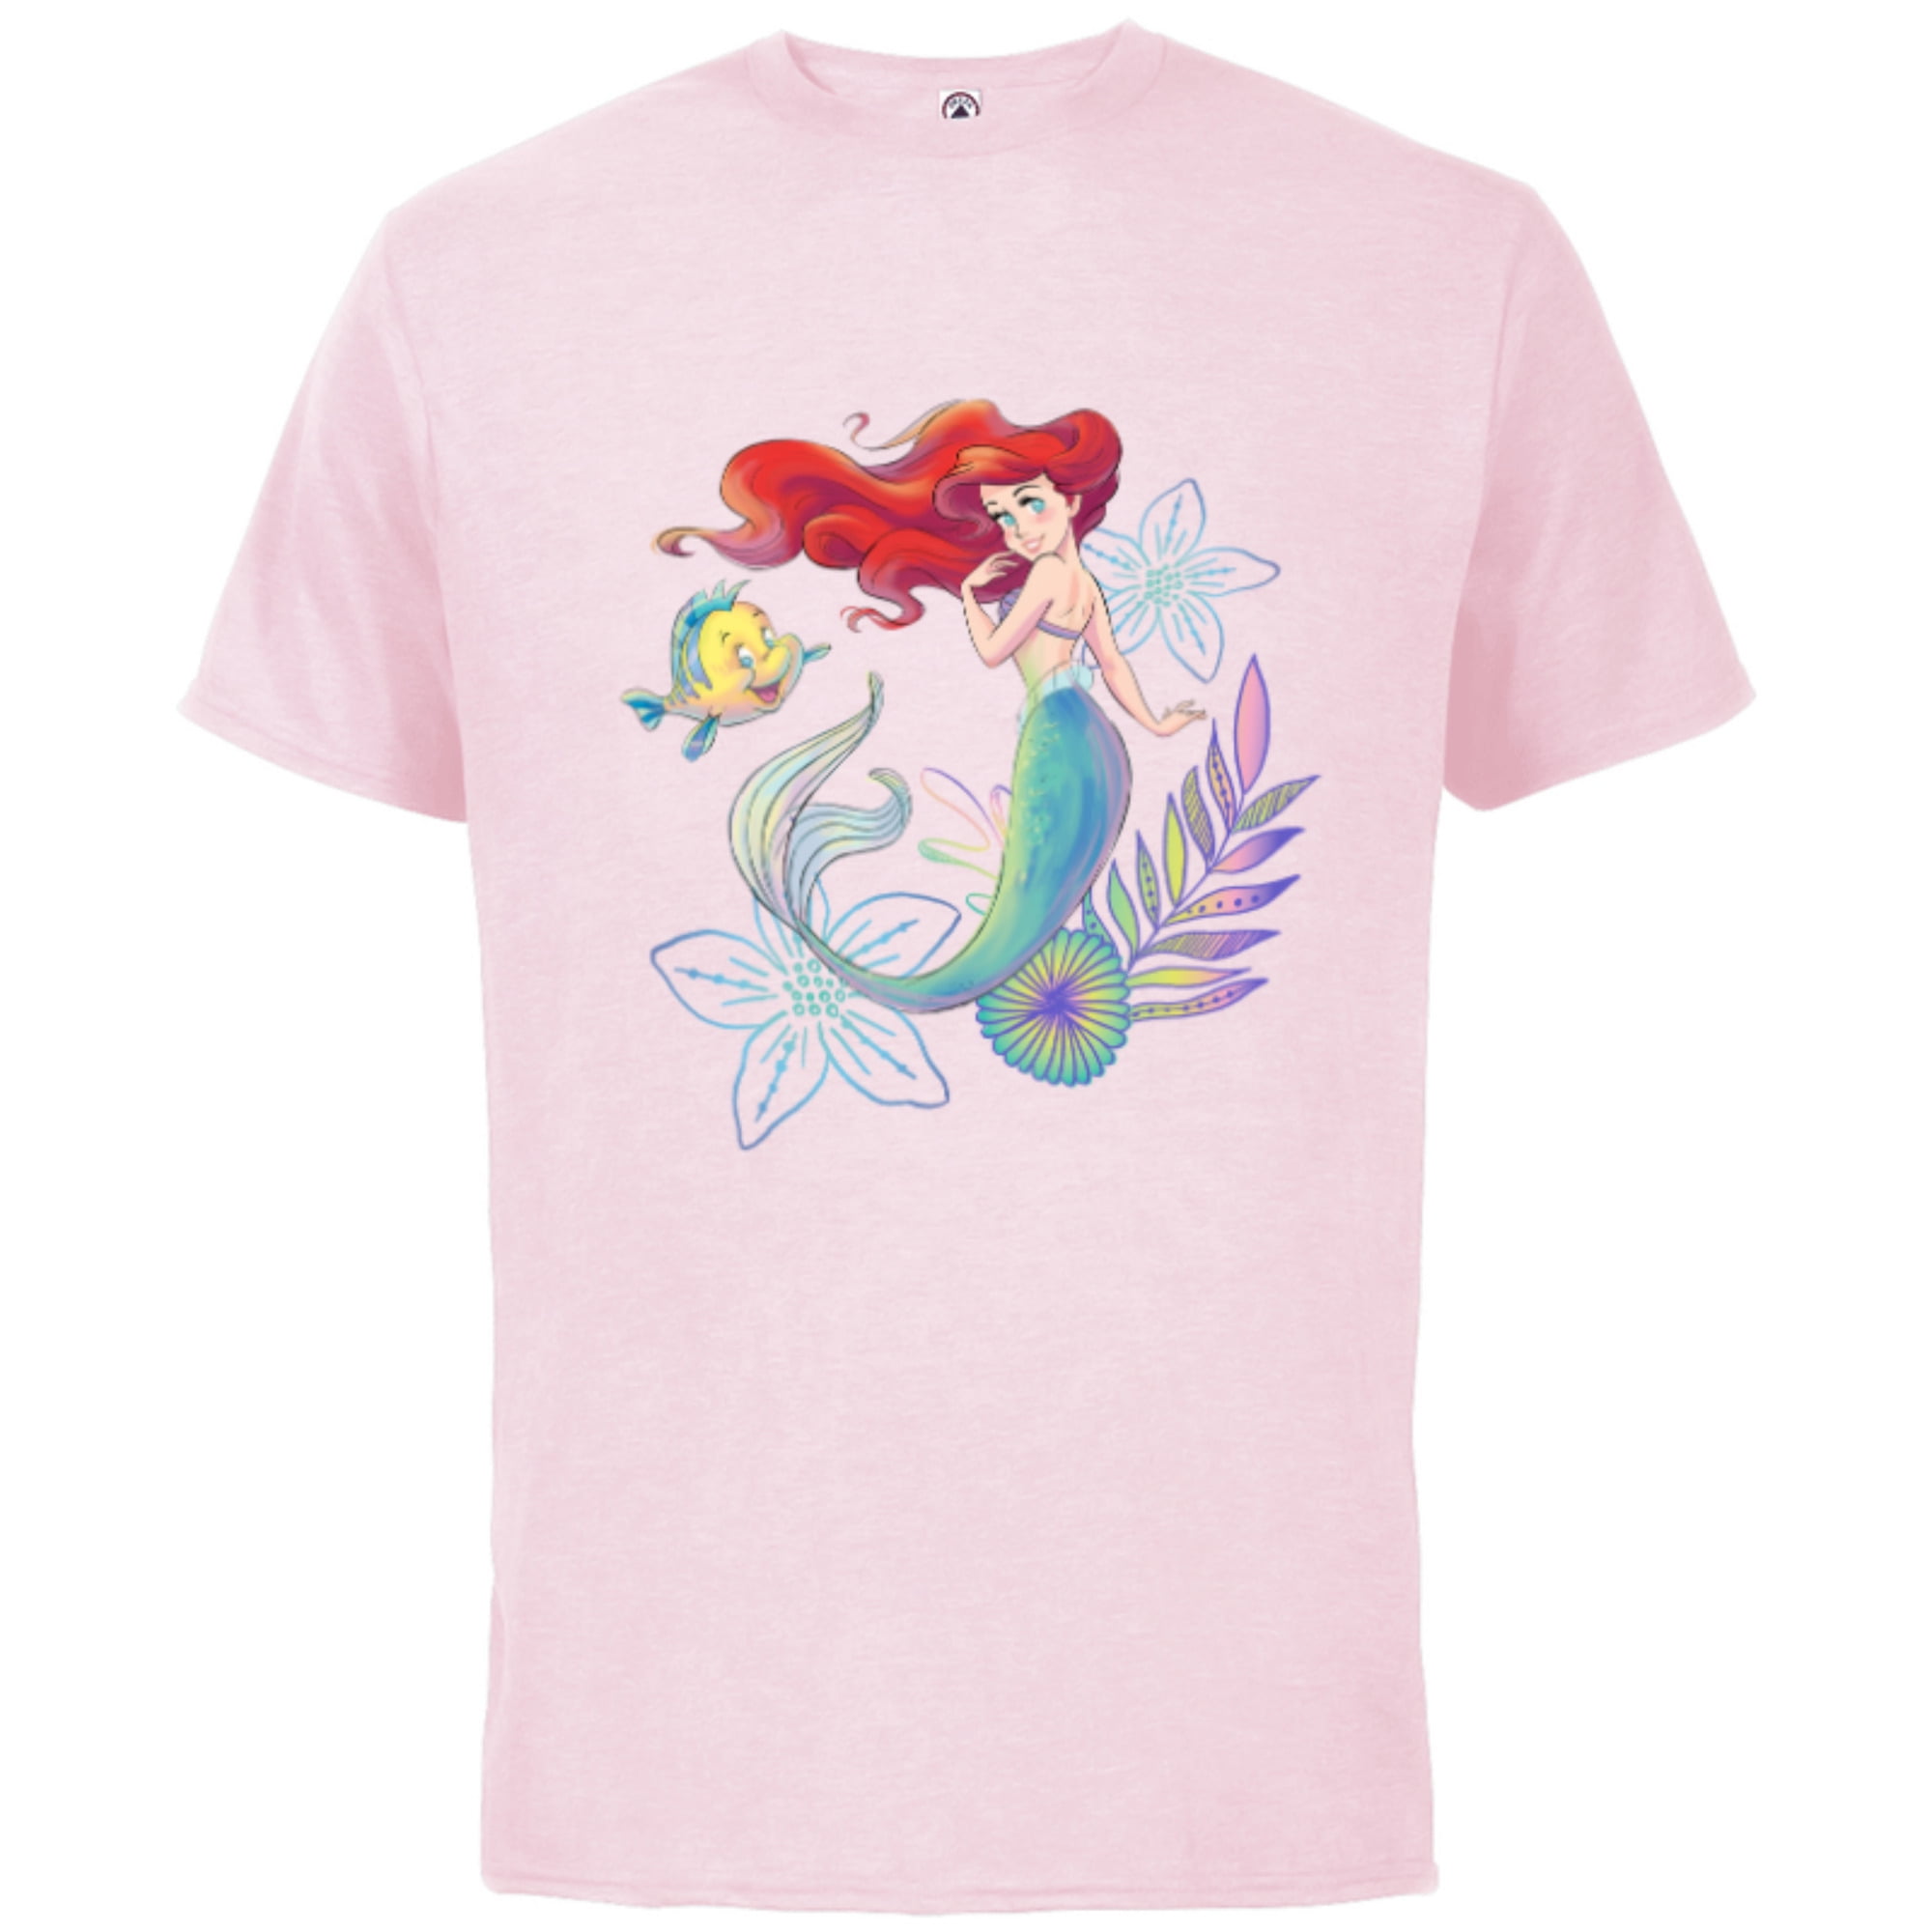 Short Shirt Ariel Disney Mermaid for T- and - The Sea Little Pink -Customized-Soft Sleeve Adults Cotton Flounder